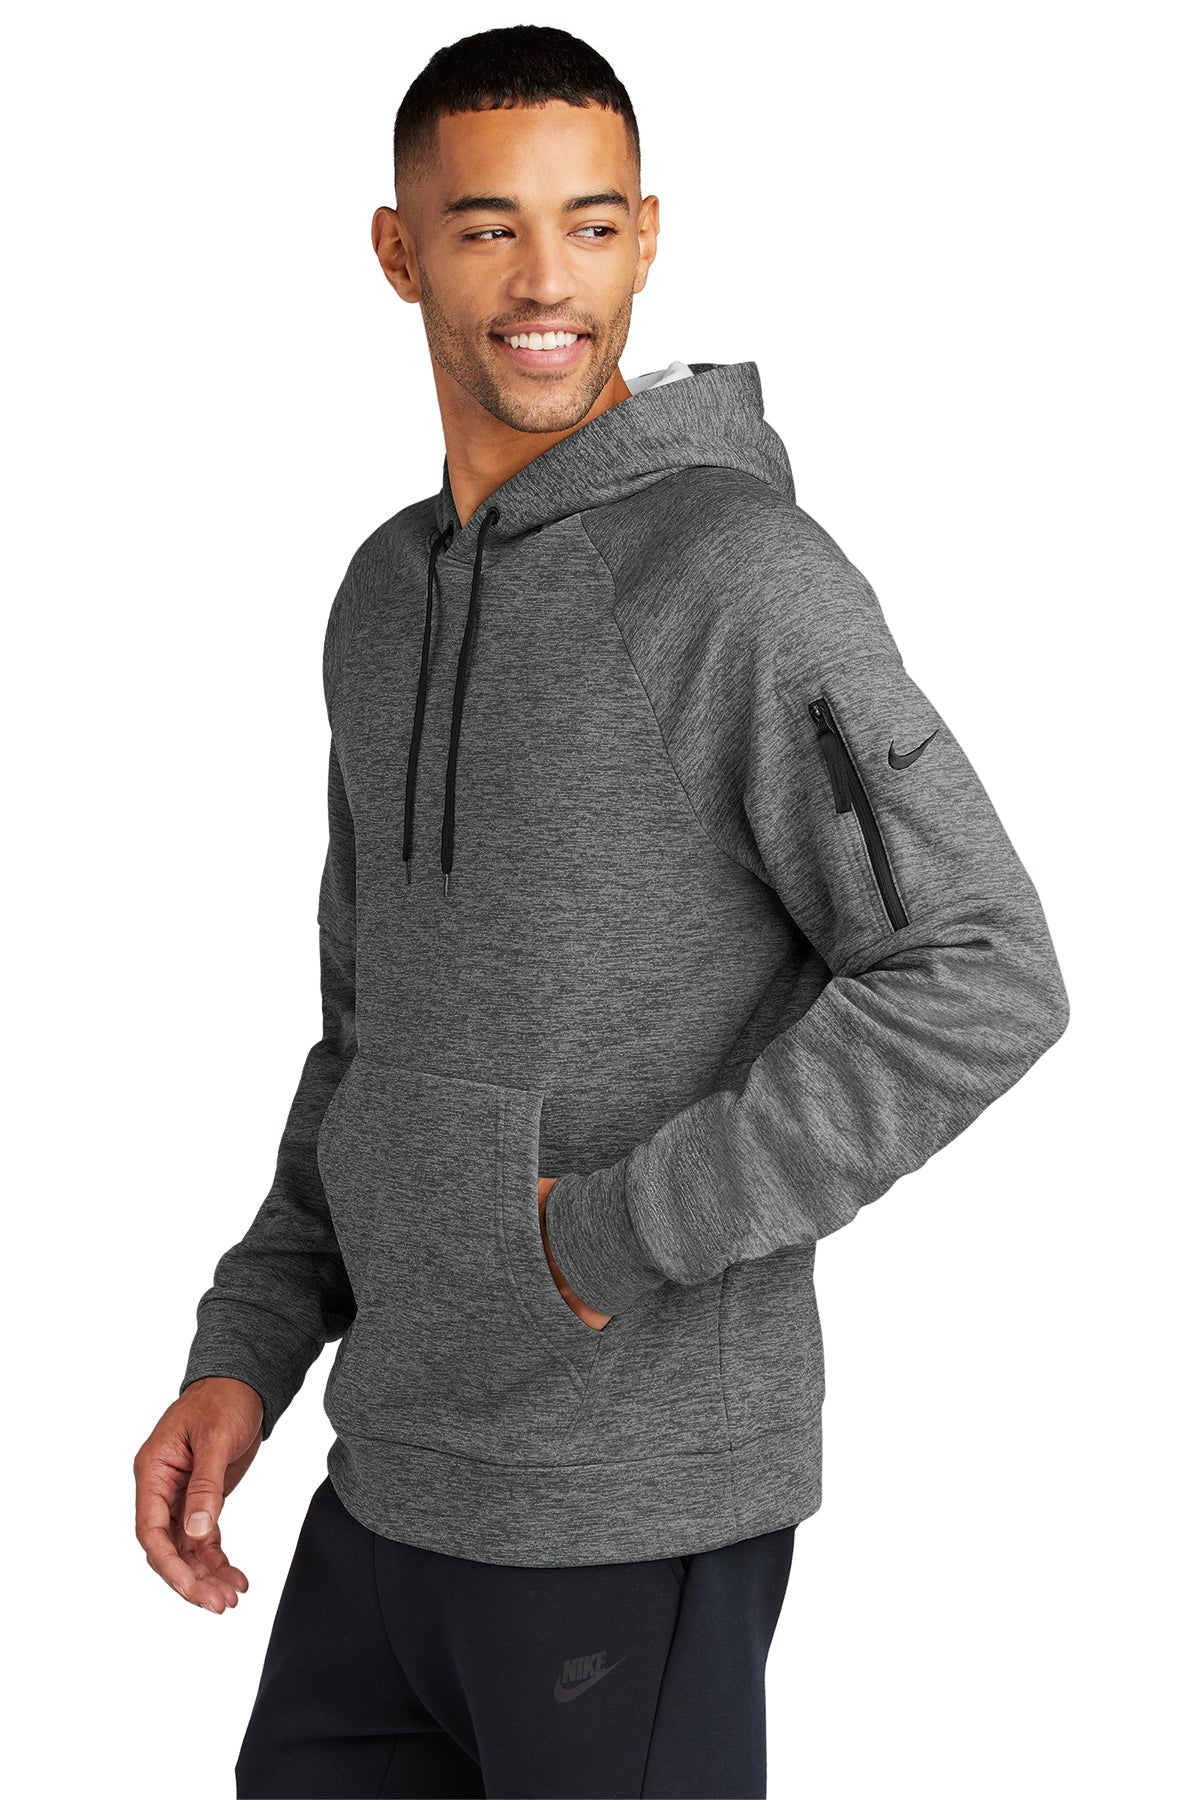 Nike Therma-FIT Pocket Pullover Branded Hoodies, Charcoal Heather